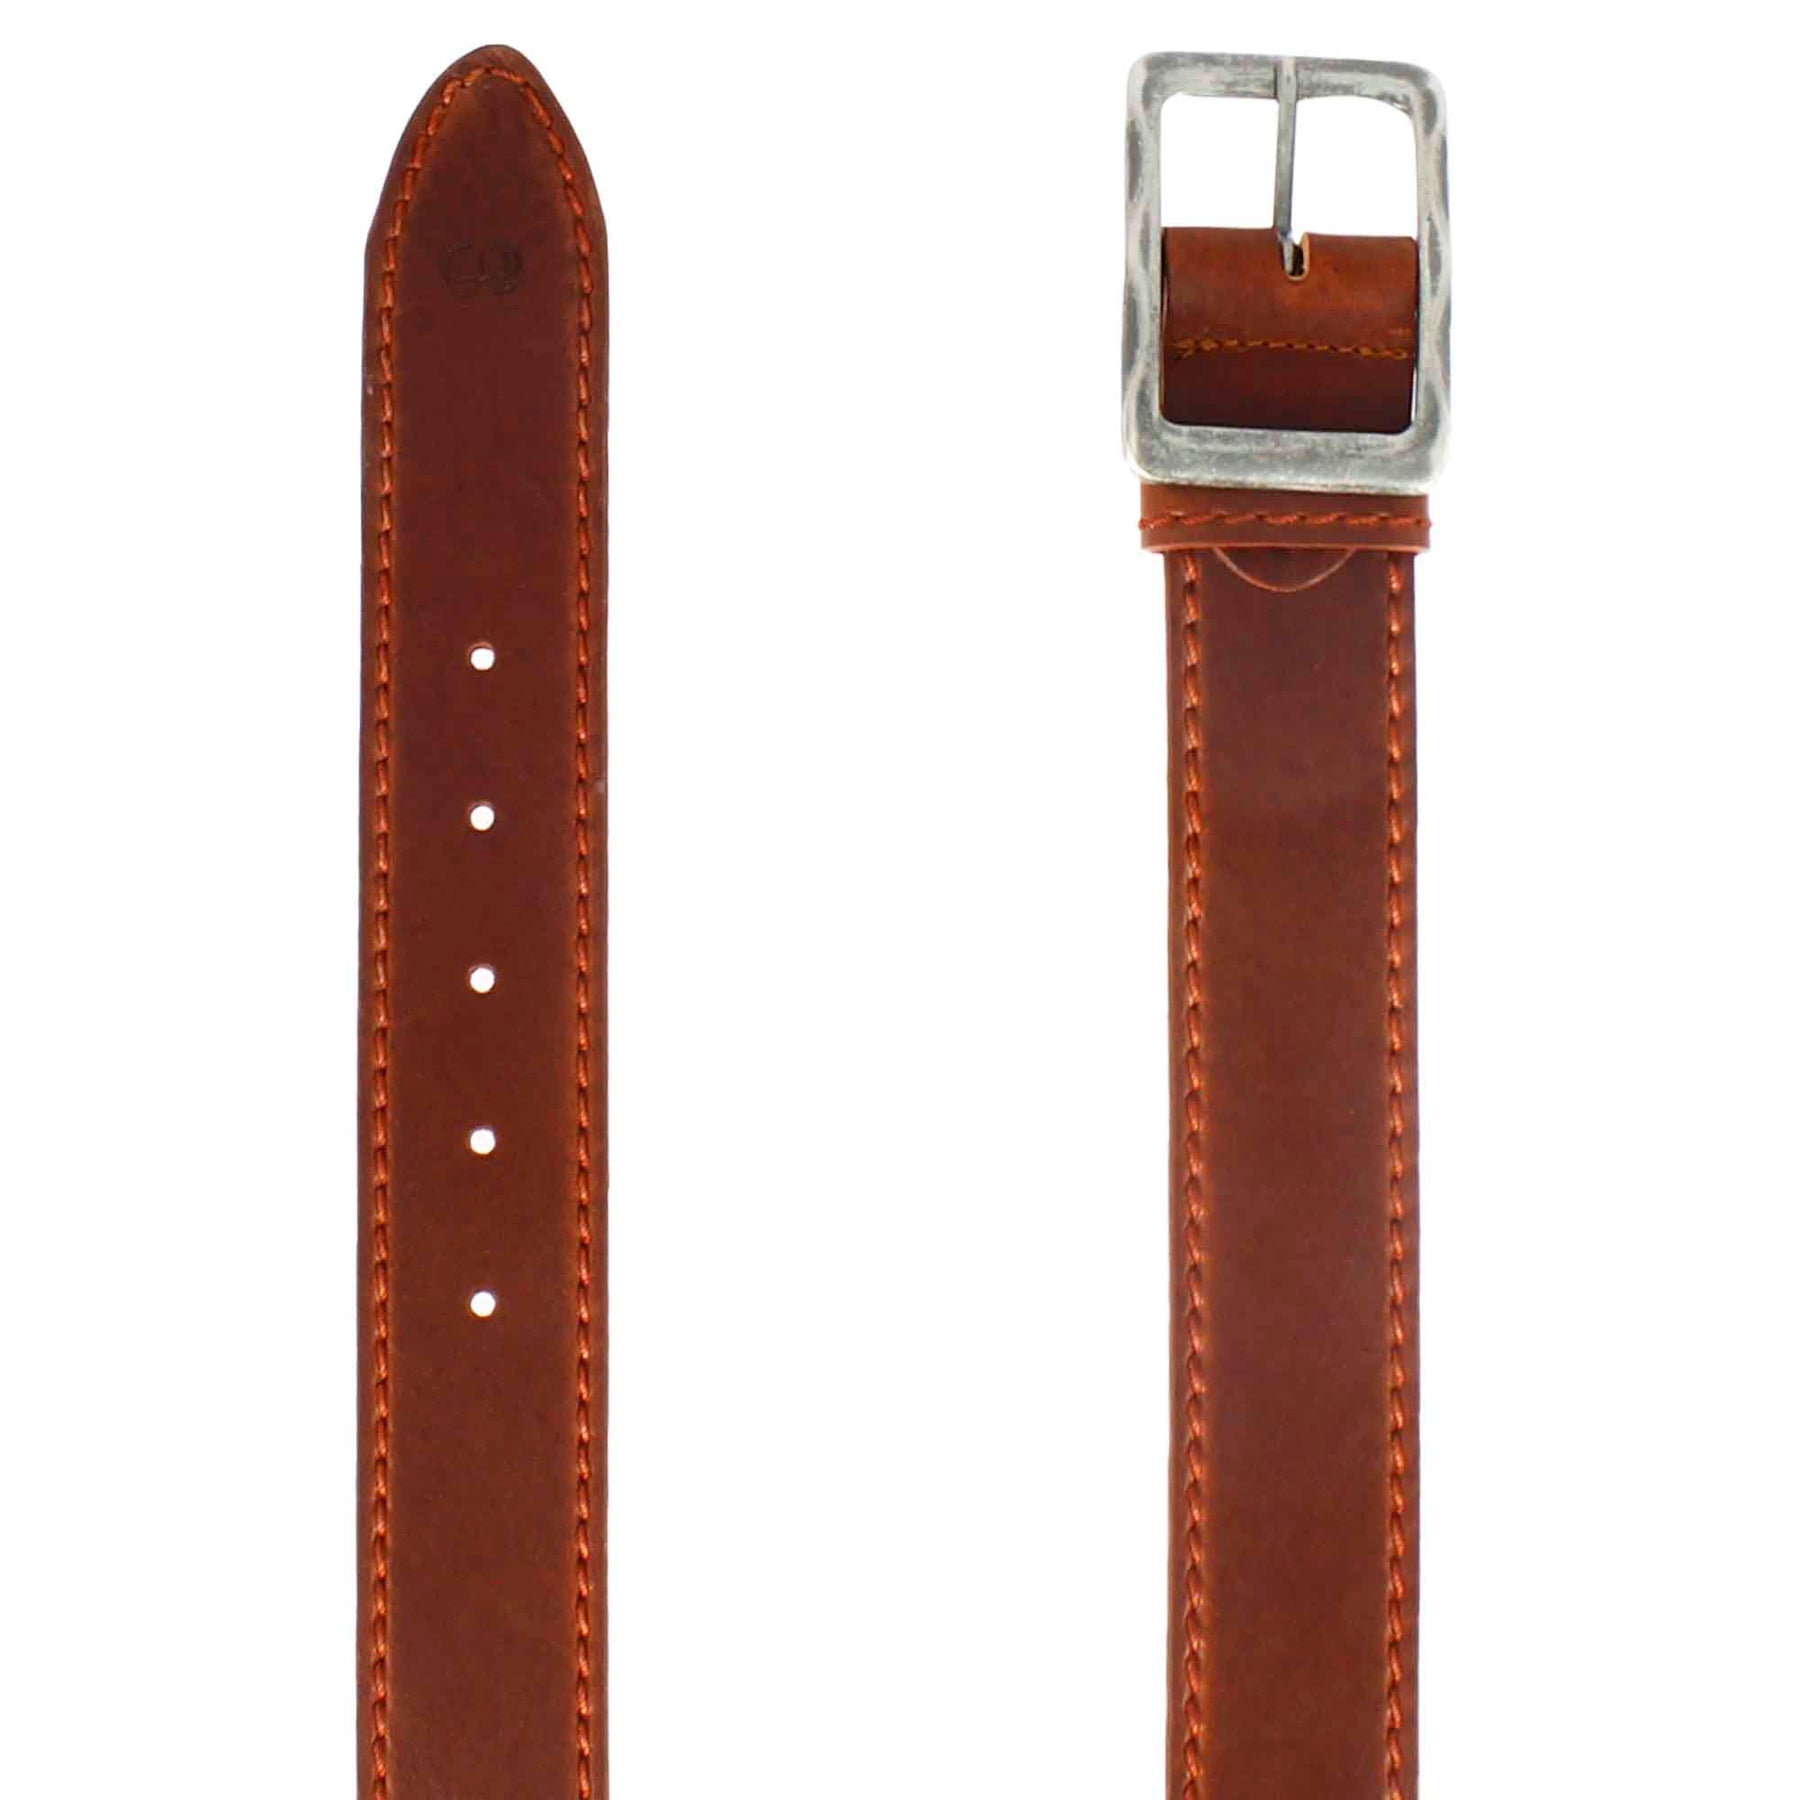 Classic men's belt in light brown leather with stitching